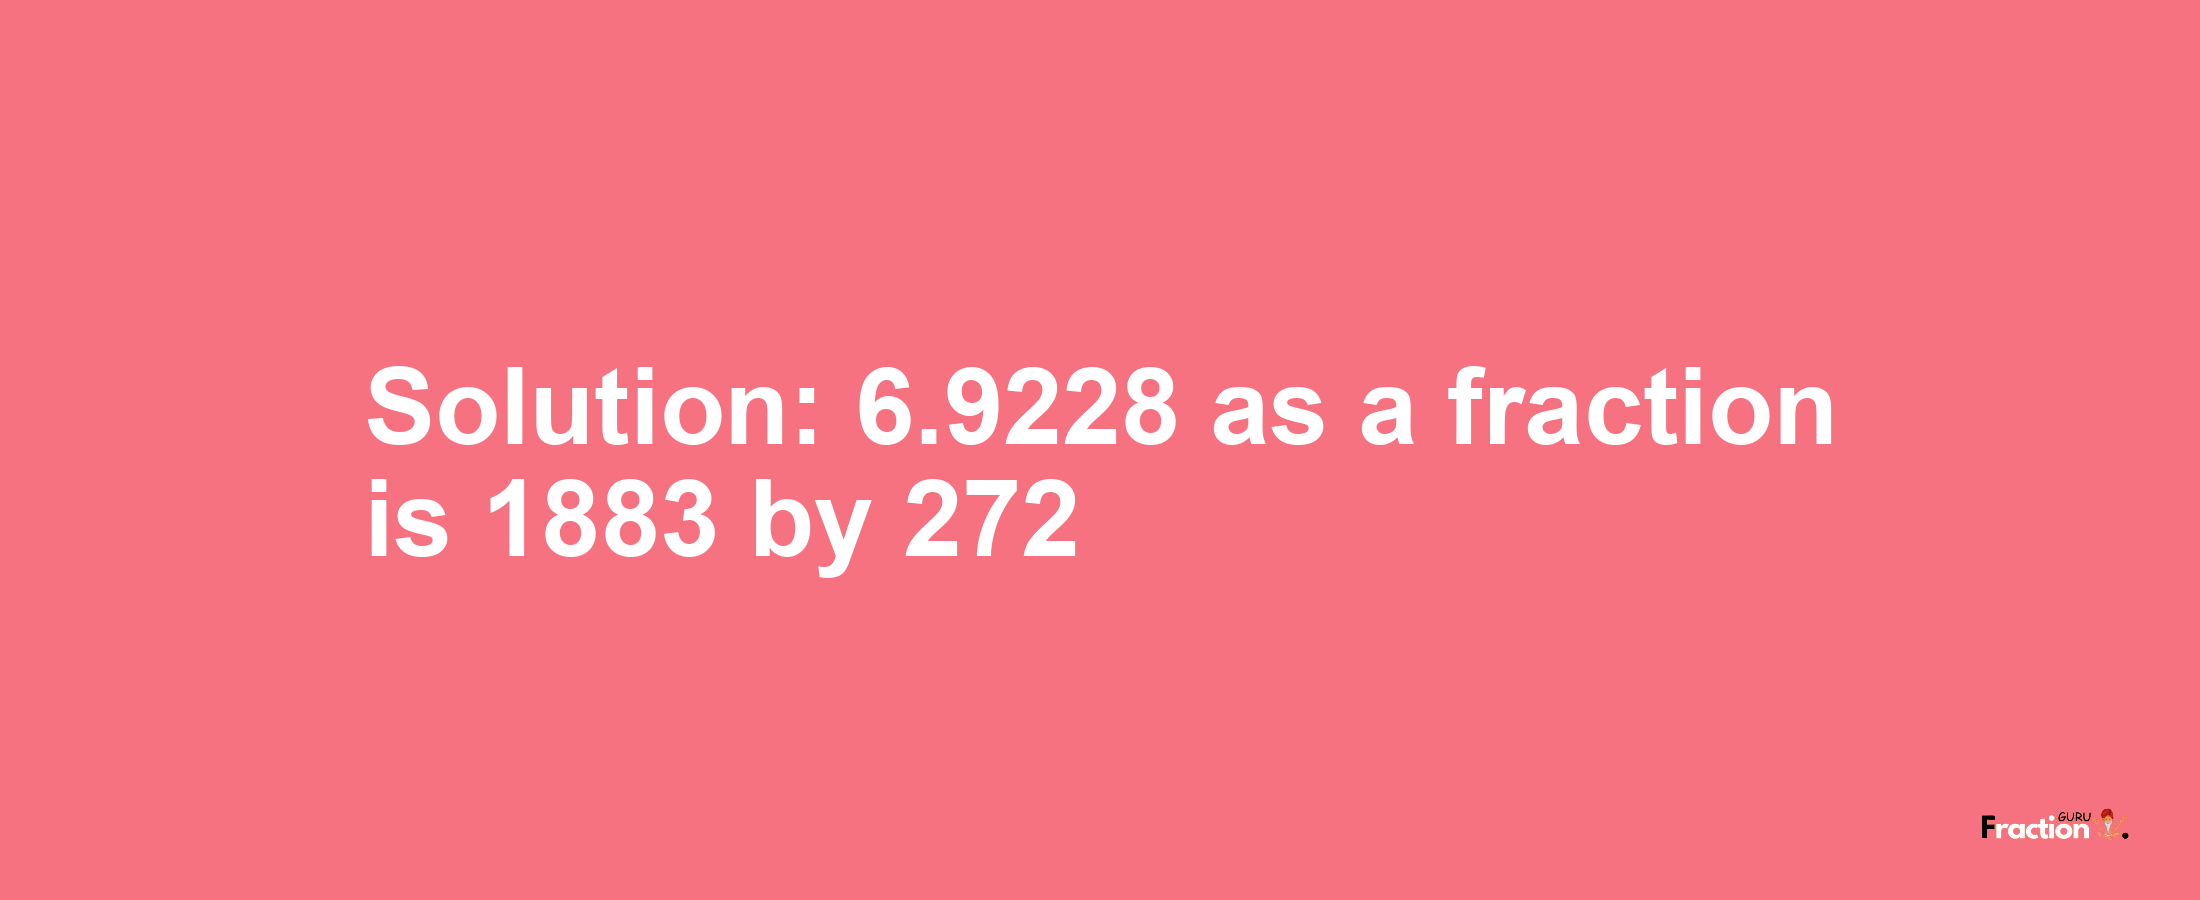 Solution:6.9228 as a fraction is 1883/272